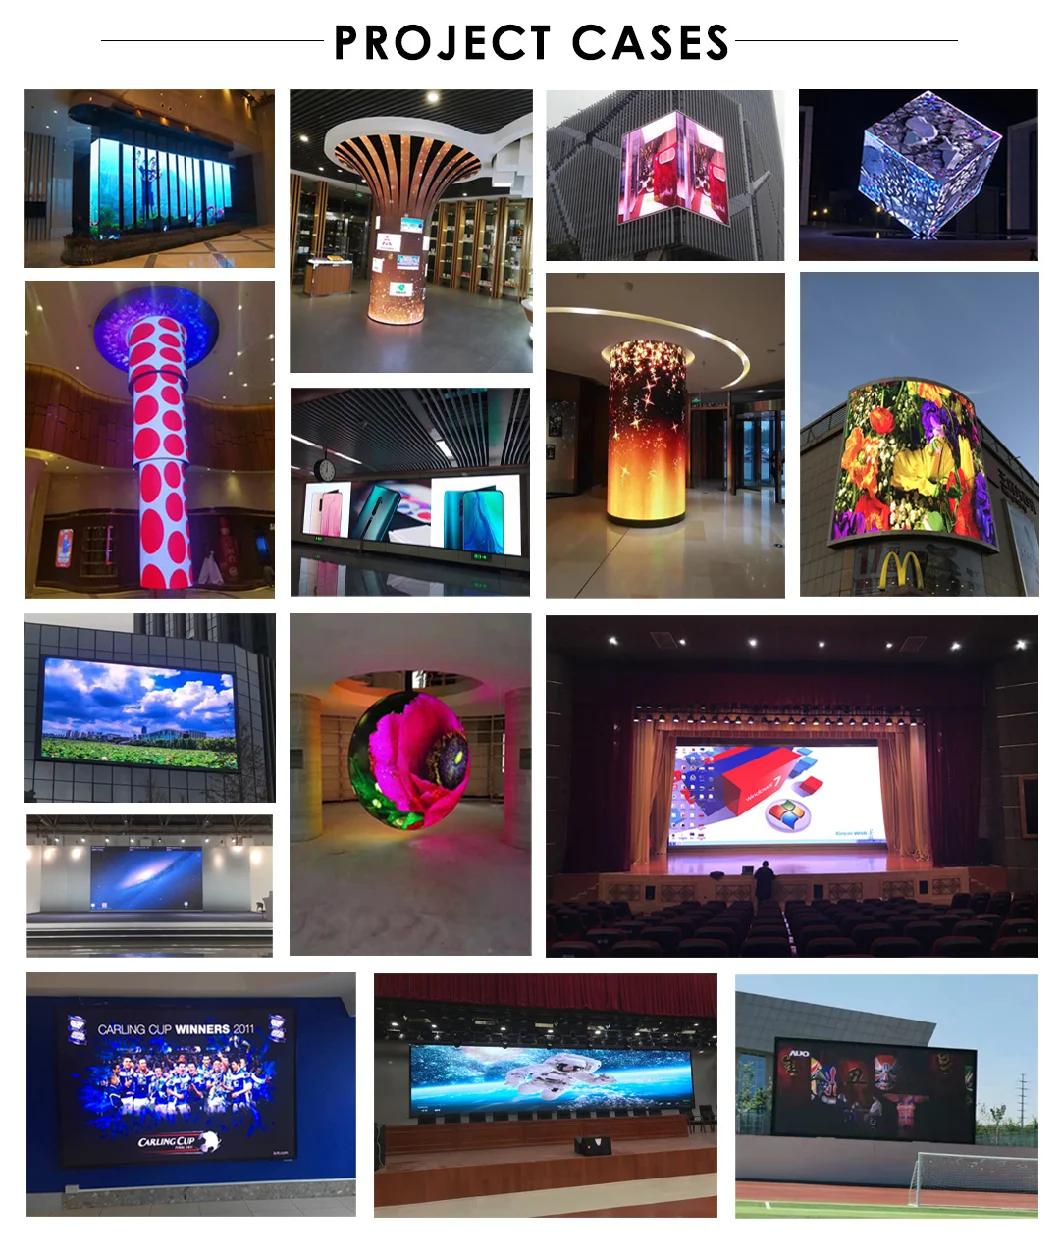 Indoor Full Color Rental Stage LED Display Screen P4.81 Definition LED Screen